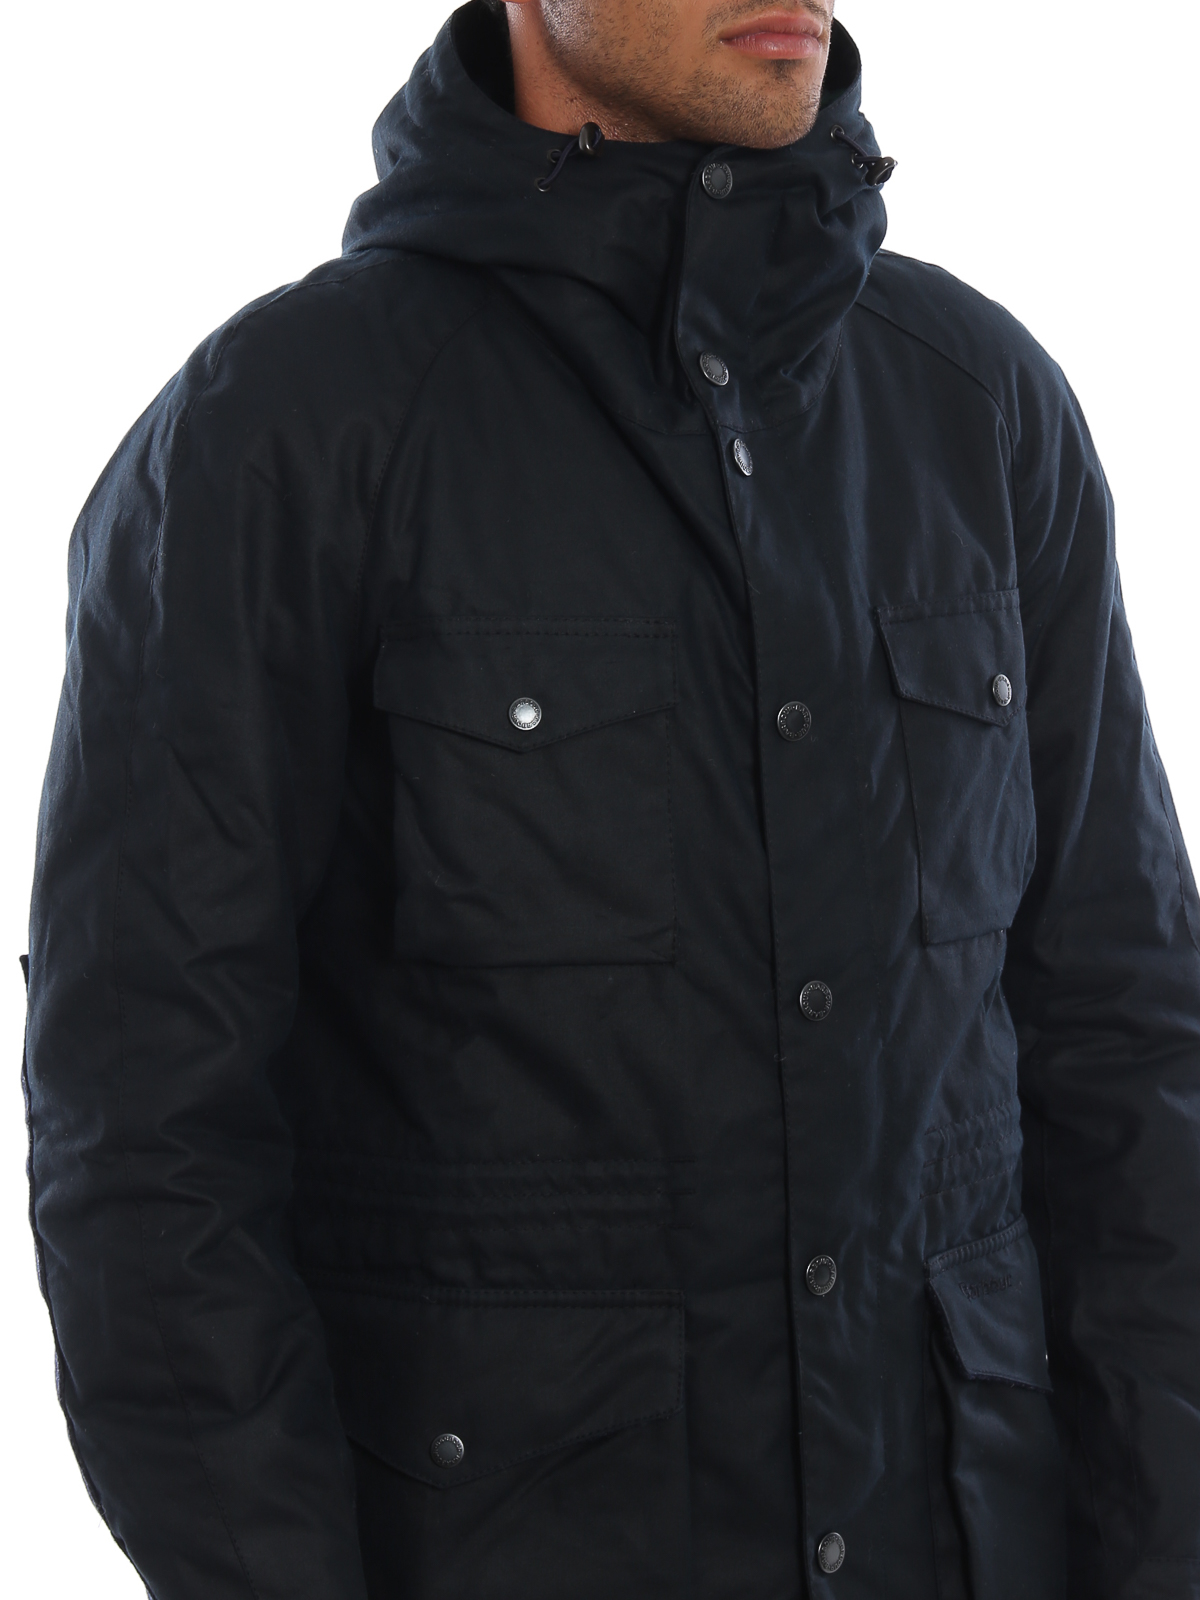 barbour coll waxed cotton jacket